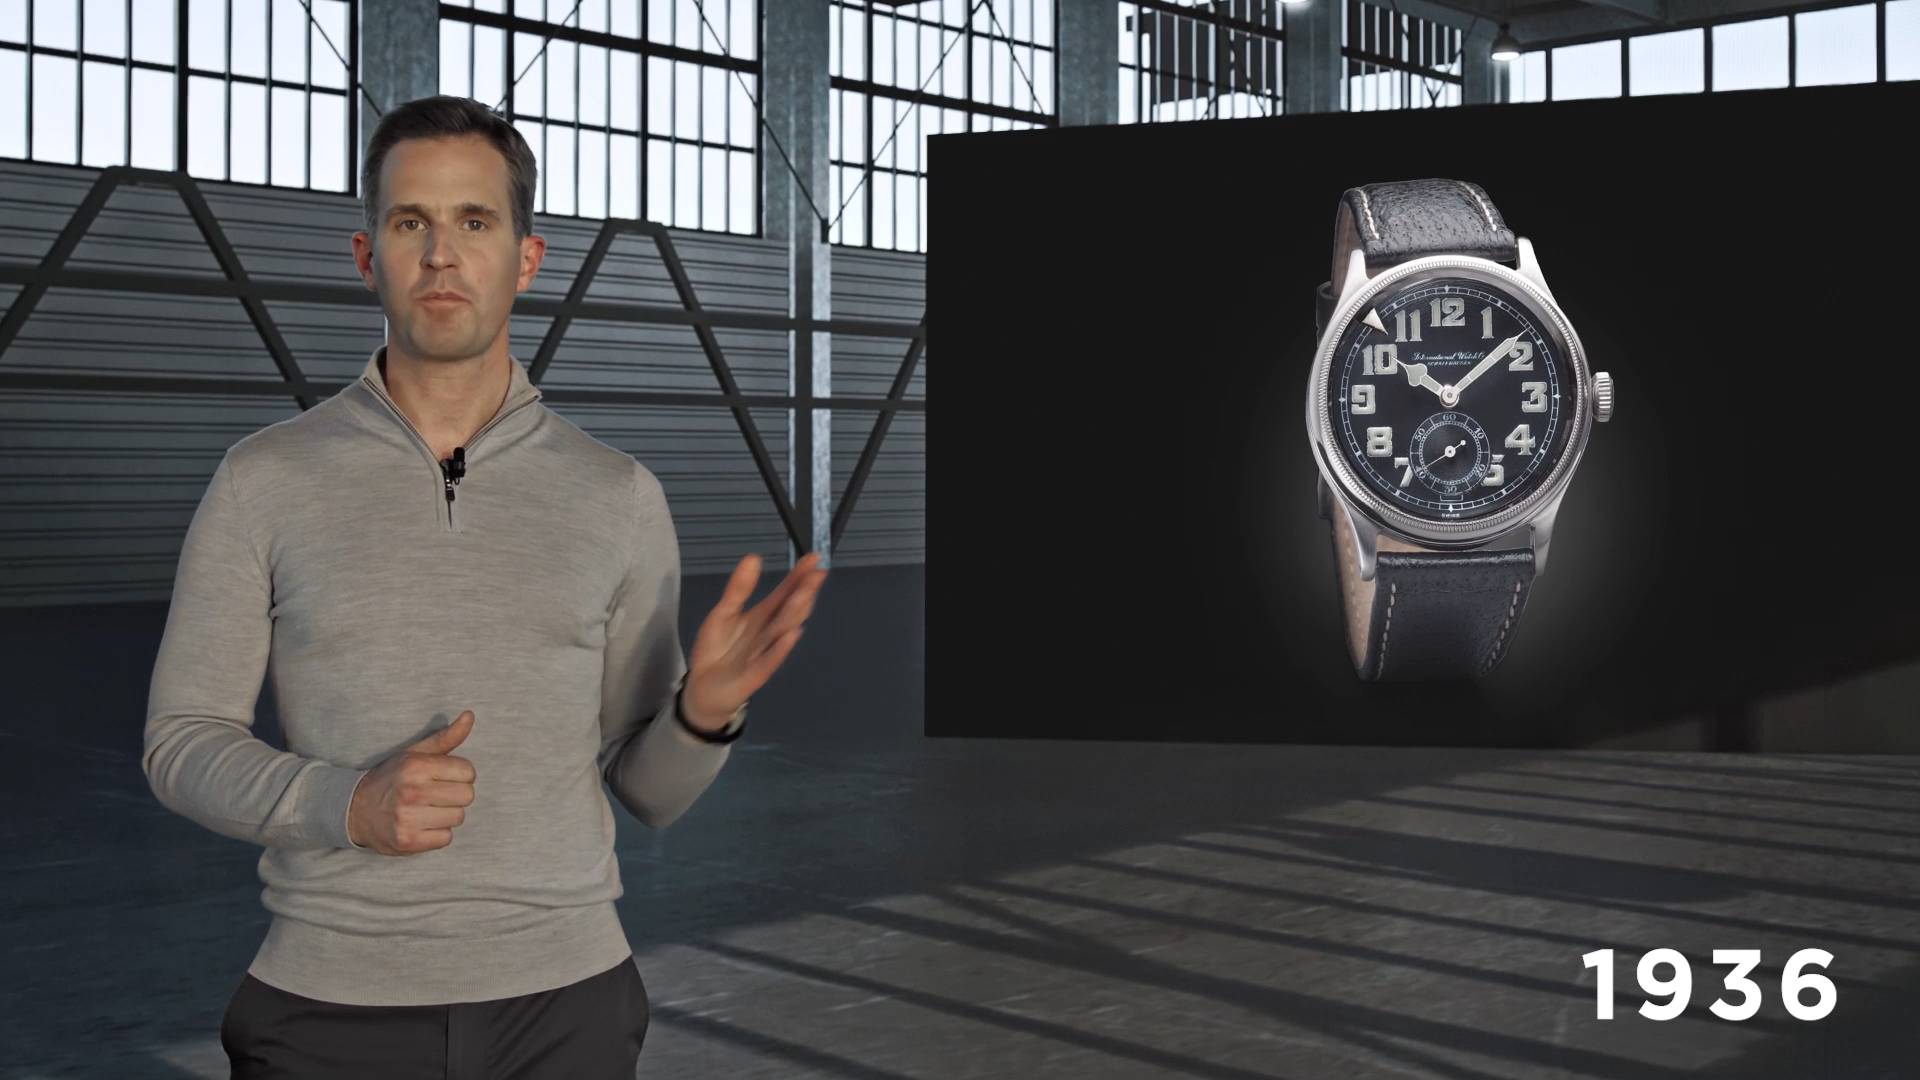 Christopher Grainer Herr, the CEO of IWC, pointing at a watch in a hangar.